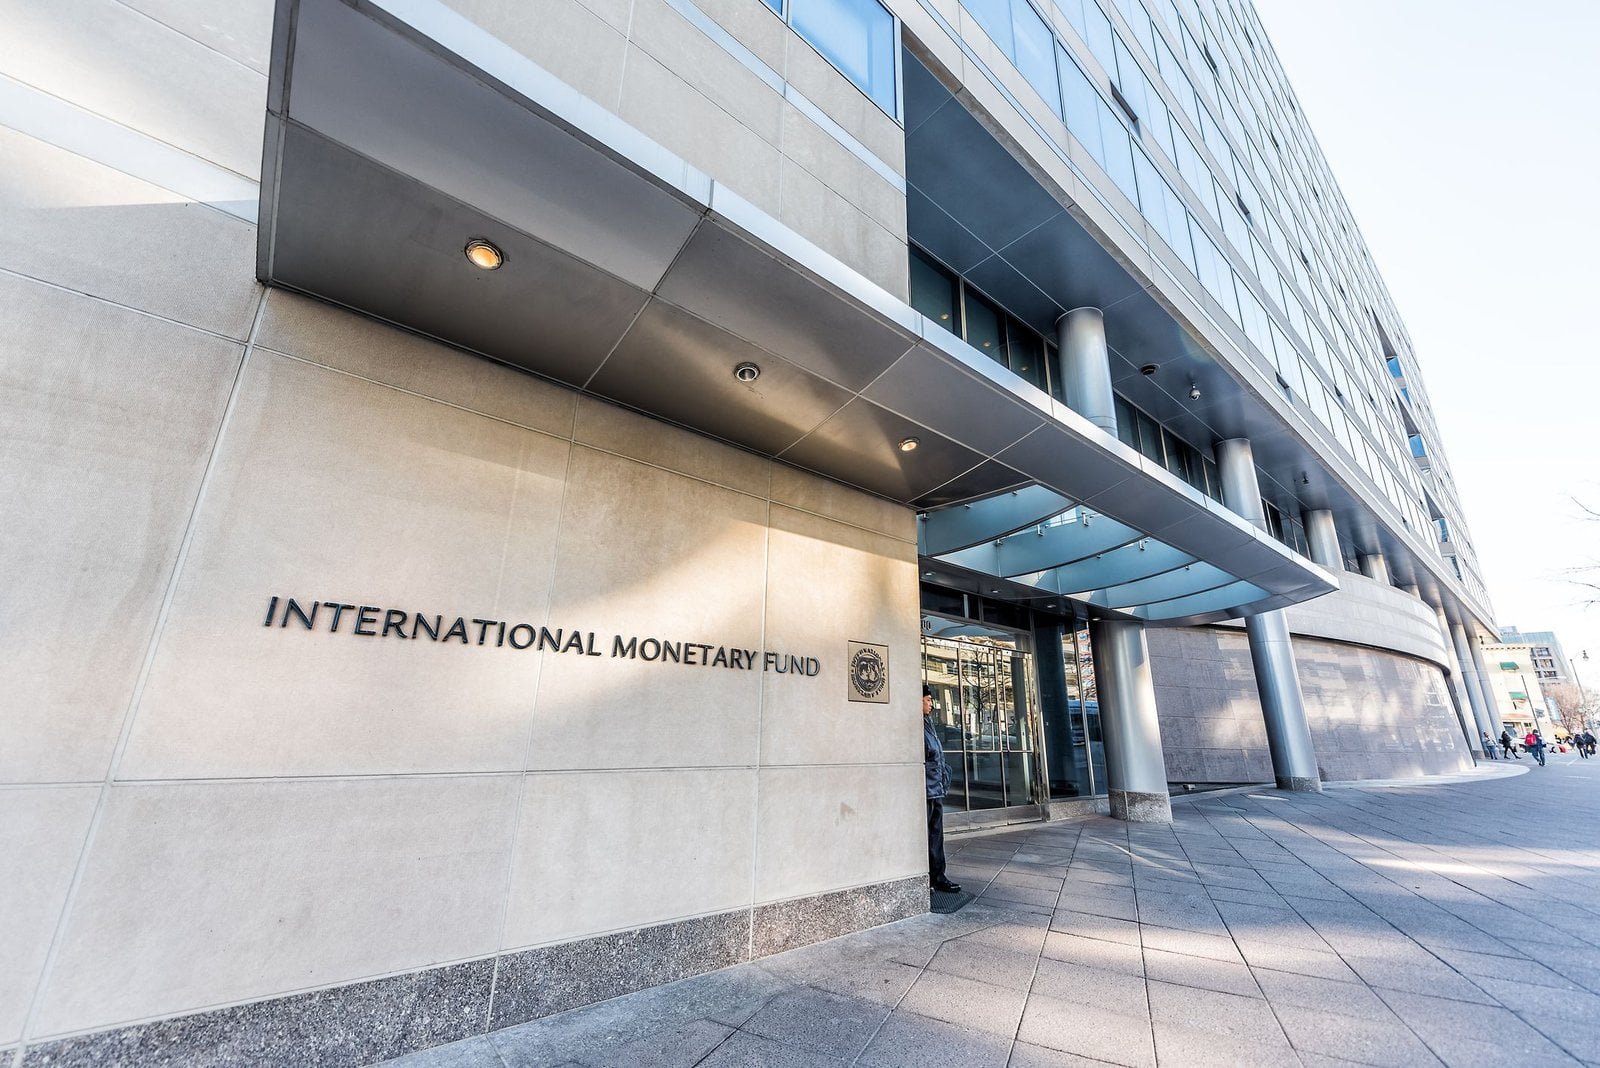 imf-sees-significant-increase-in-correlations-between-bitcoin